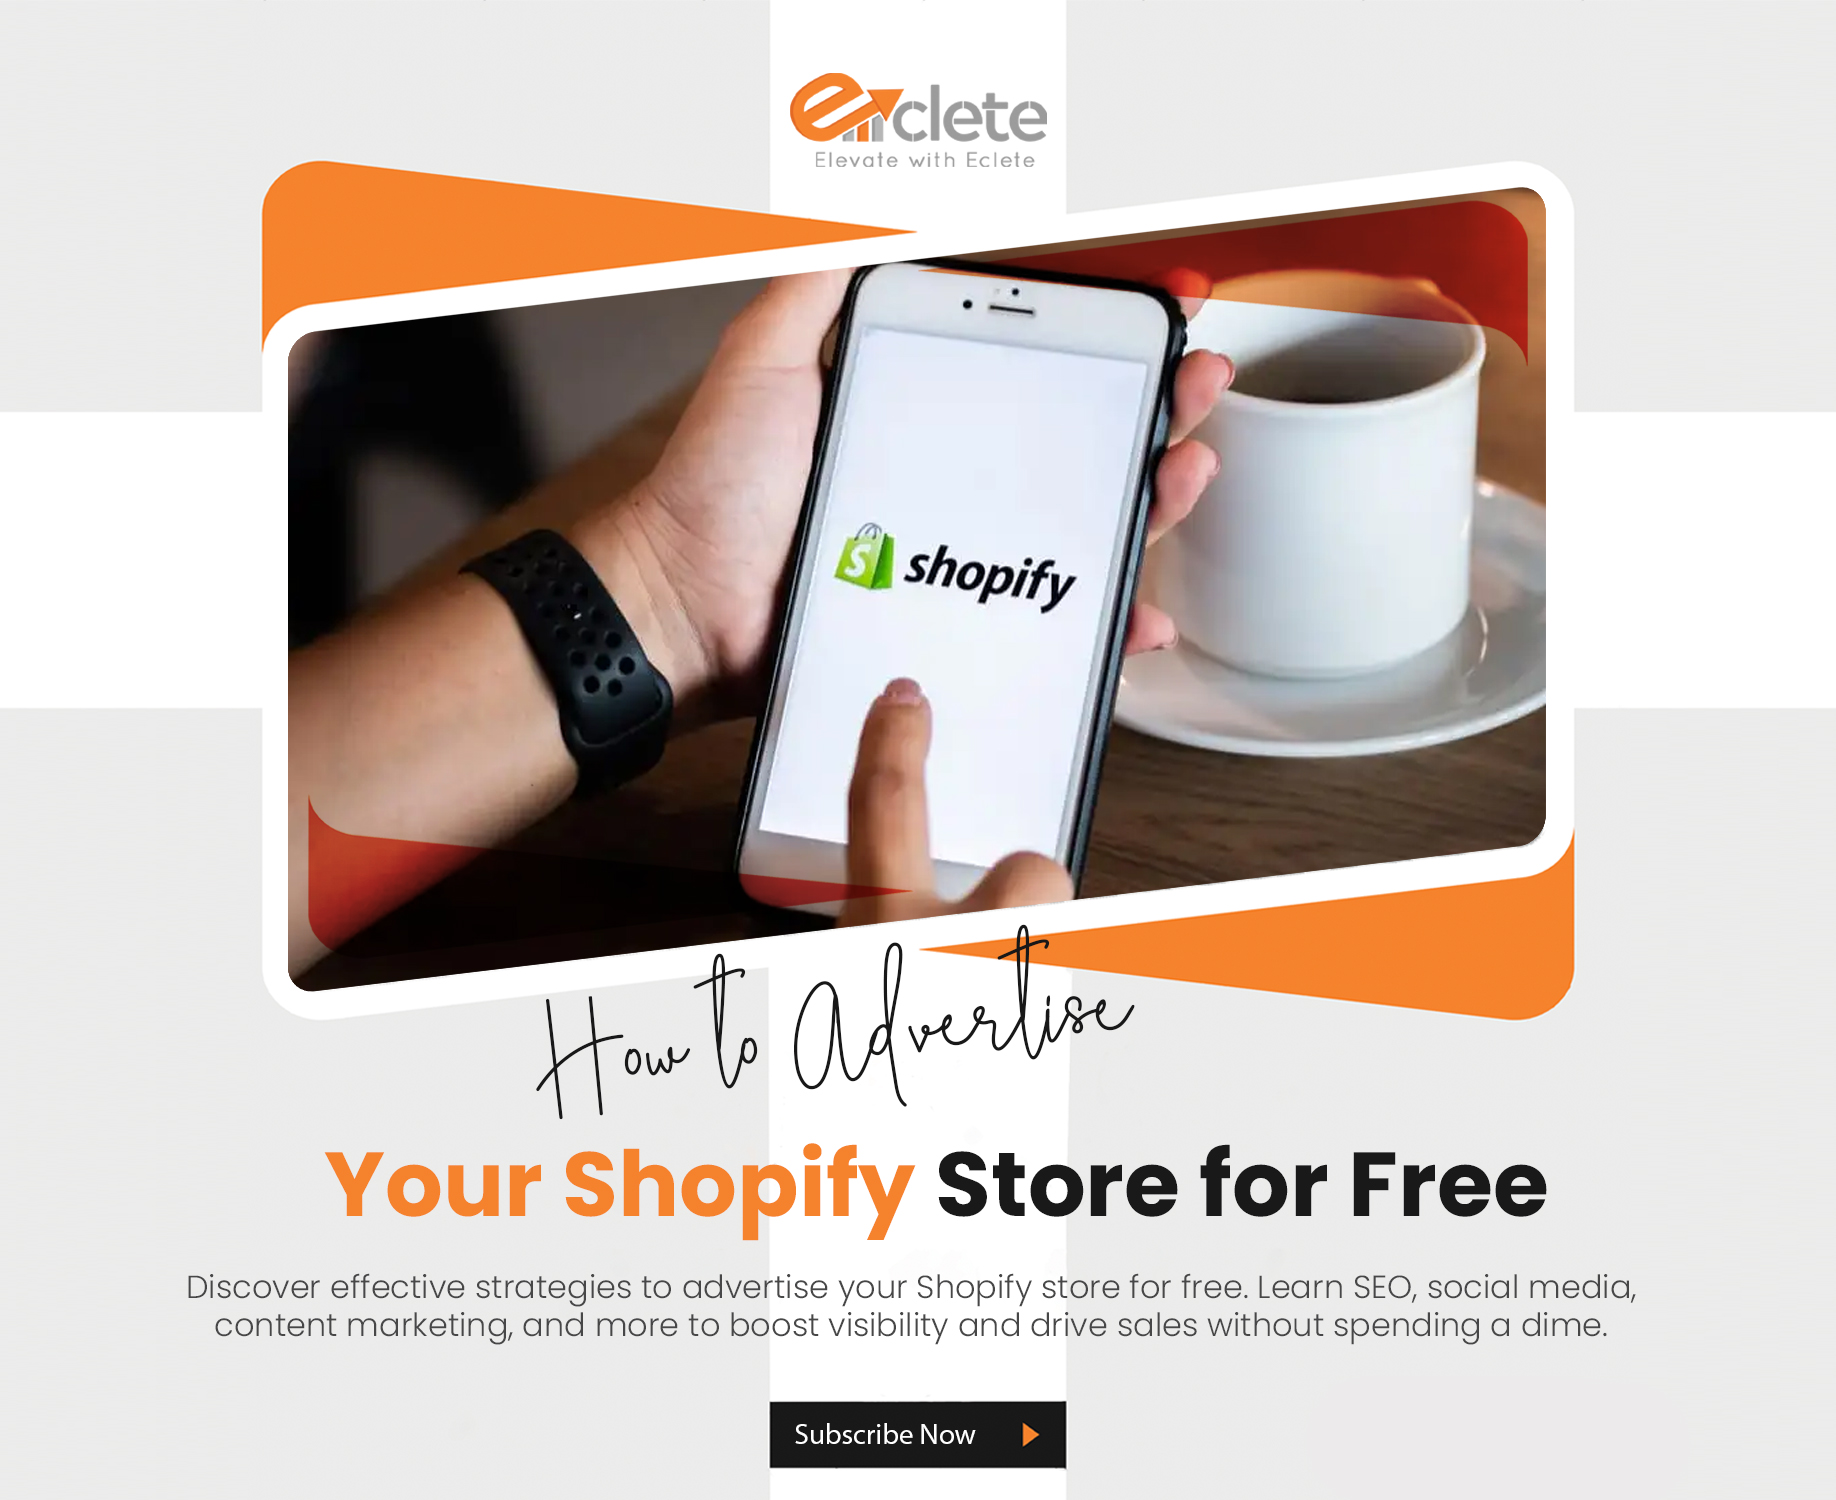 How to Advertise Your Shopify Store for Free testing